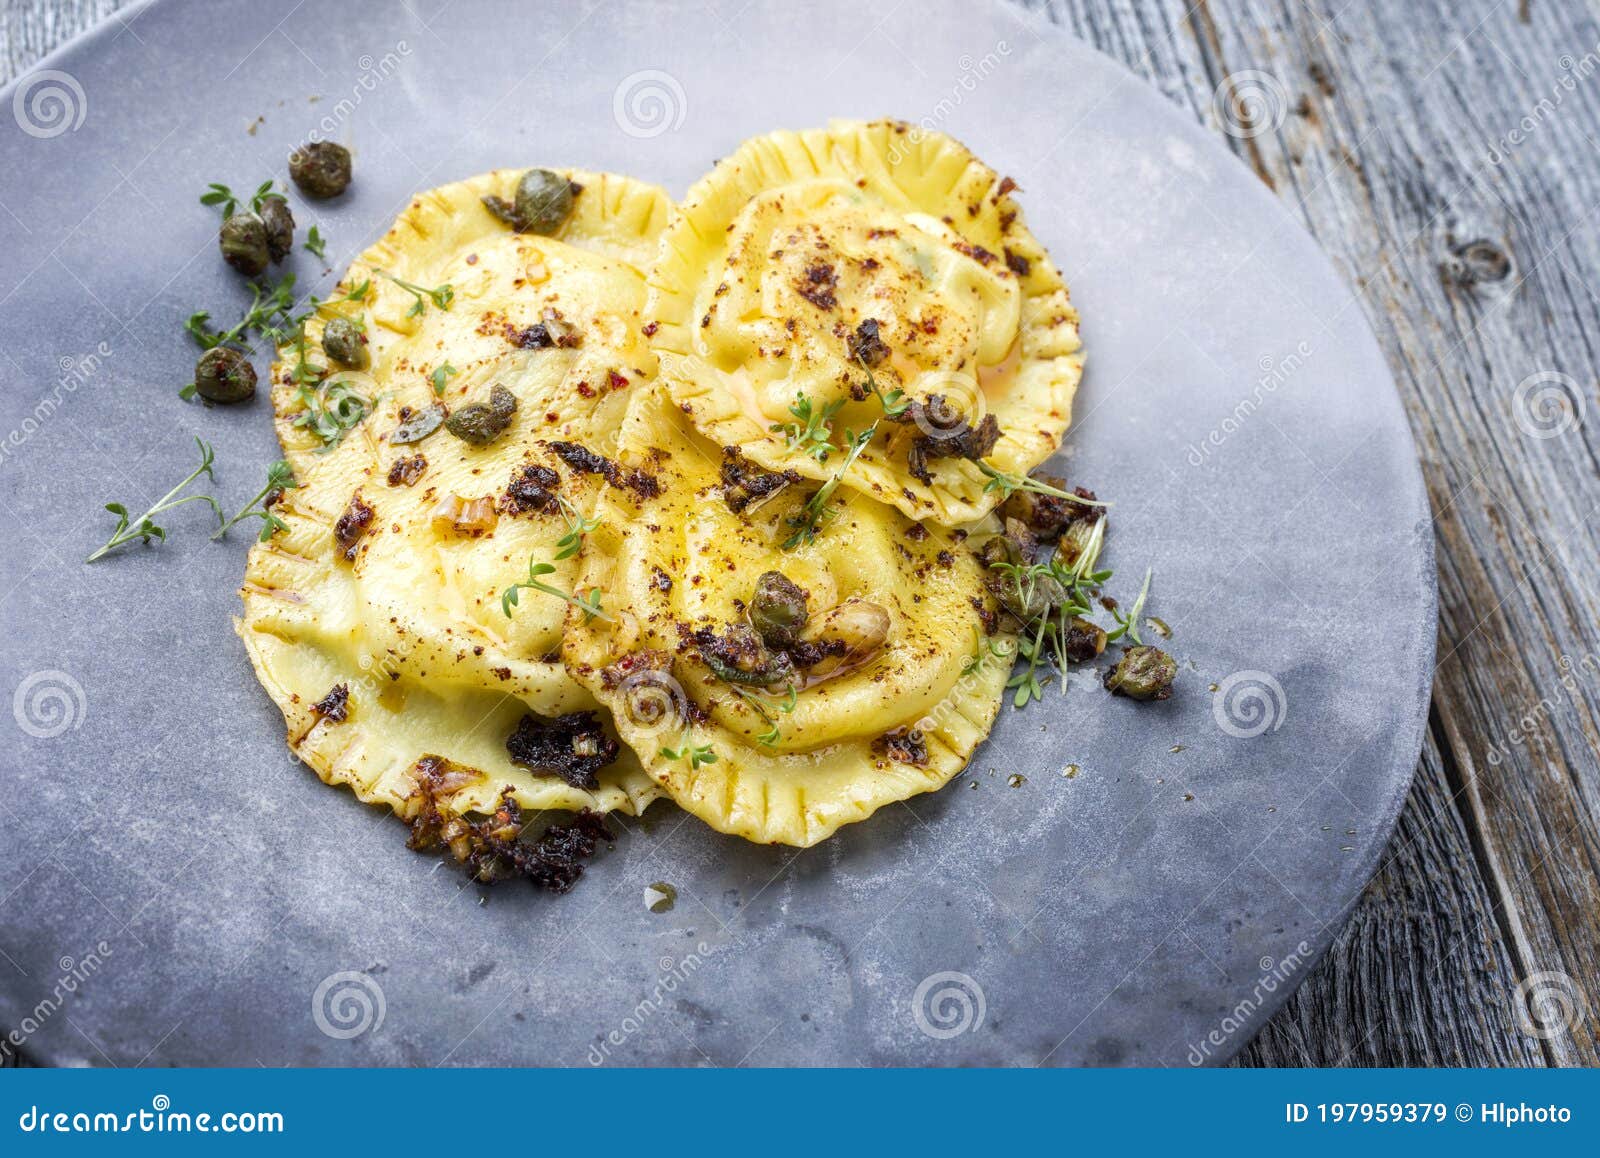 Download Modern Style Traditional Italian Ravioli Pasta With Capers And Onion Chili Pesto On A Design Plate Stock Image Image Of Dish Board 197959379